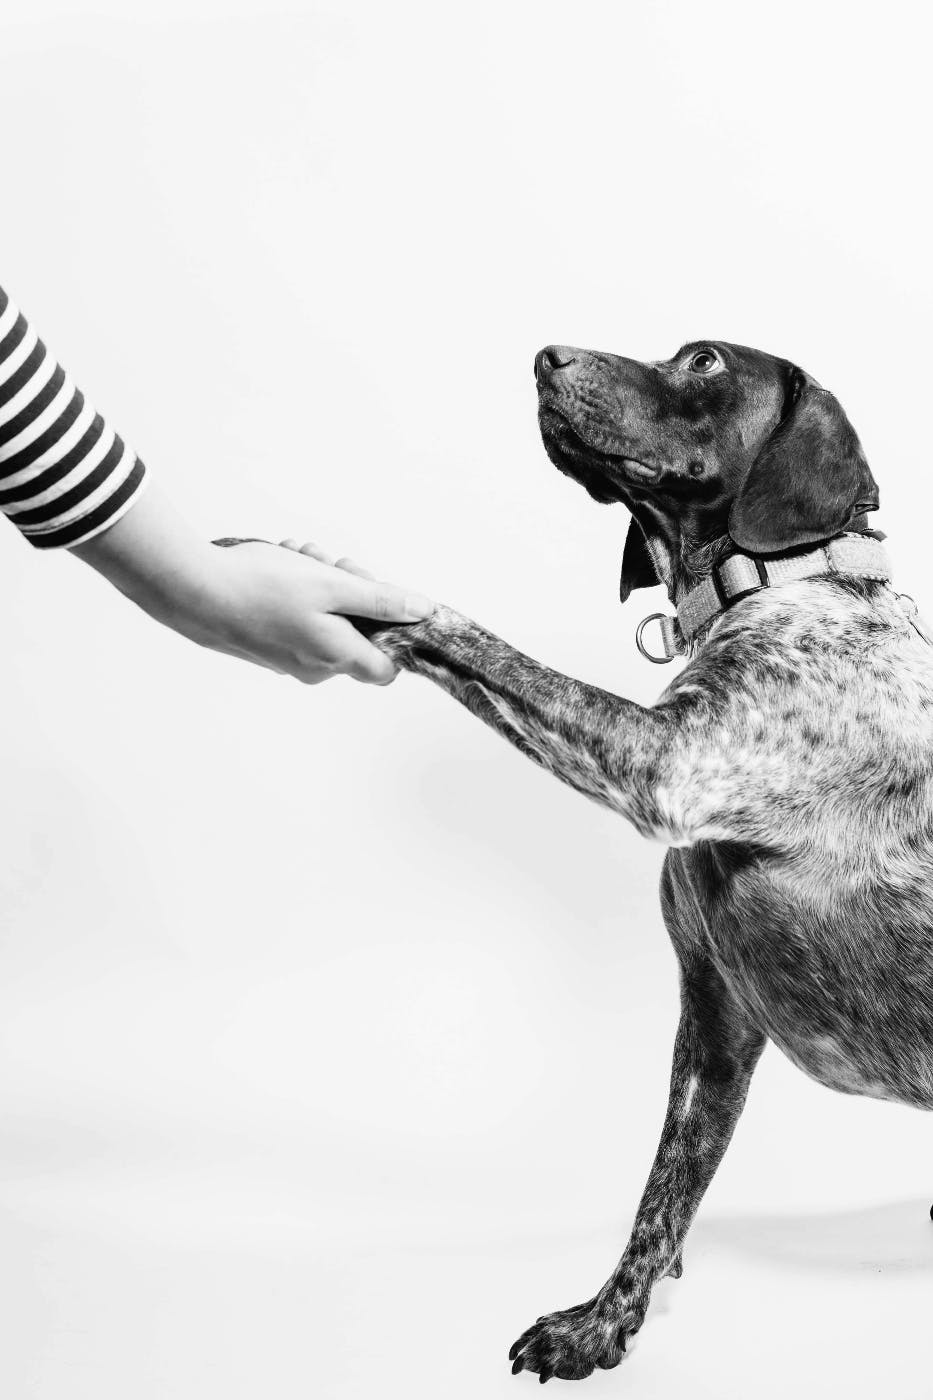 A black and white image of a dog giving his paw to a human hand